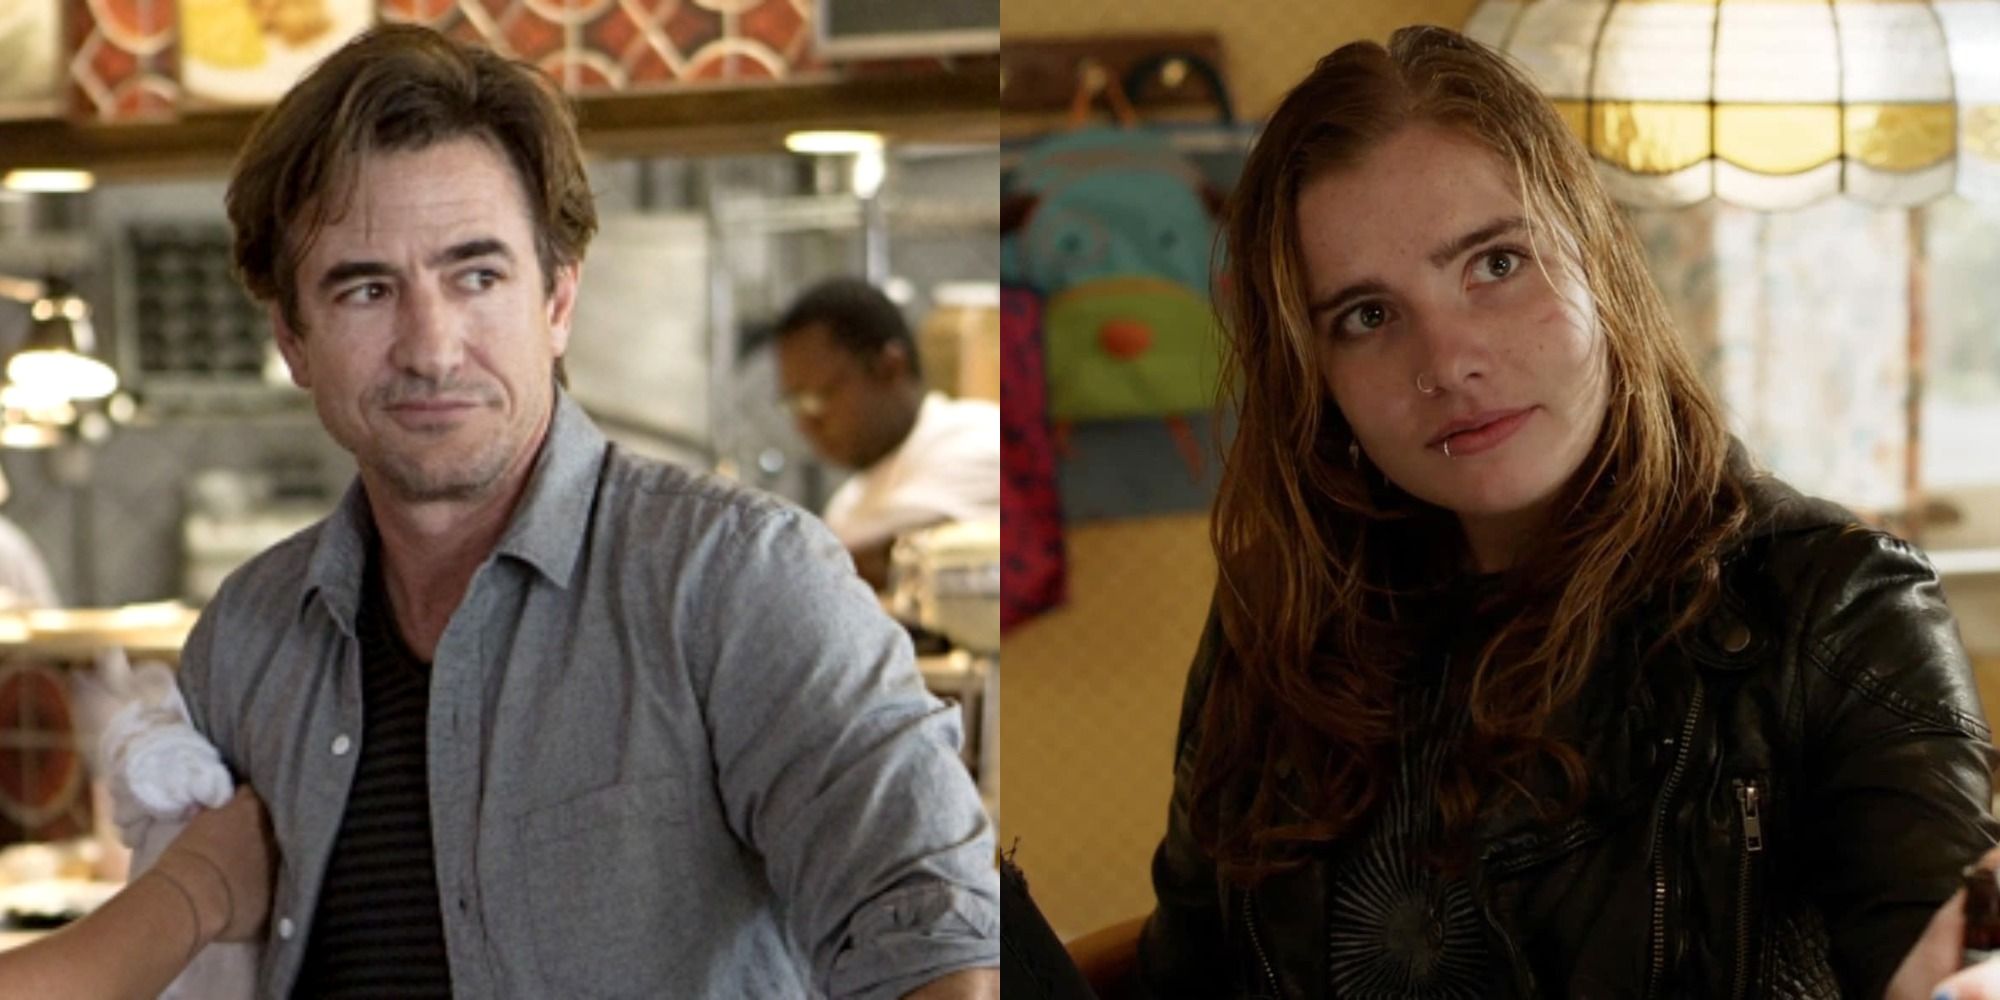 Split image showing Sean and Sandy from Shameless